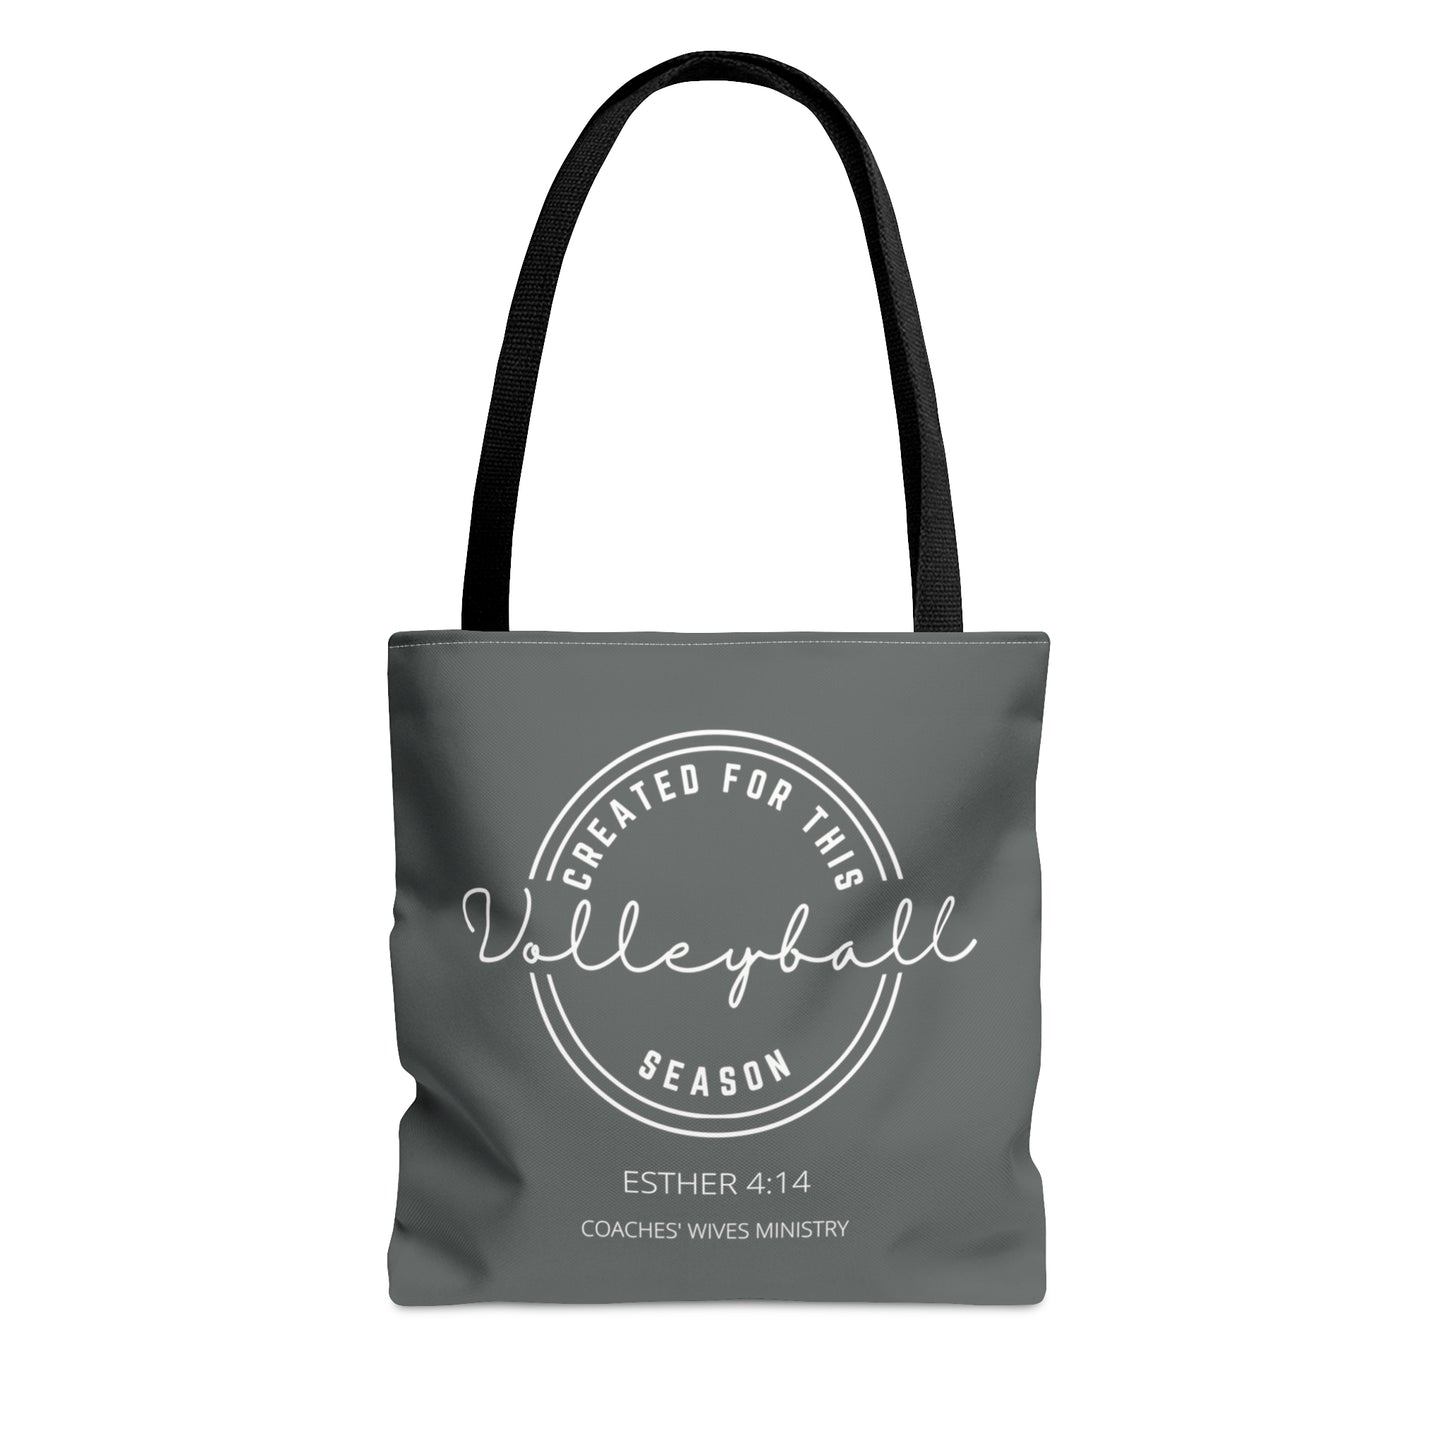 Created For This Season, Volleyball, Tote Bag